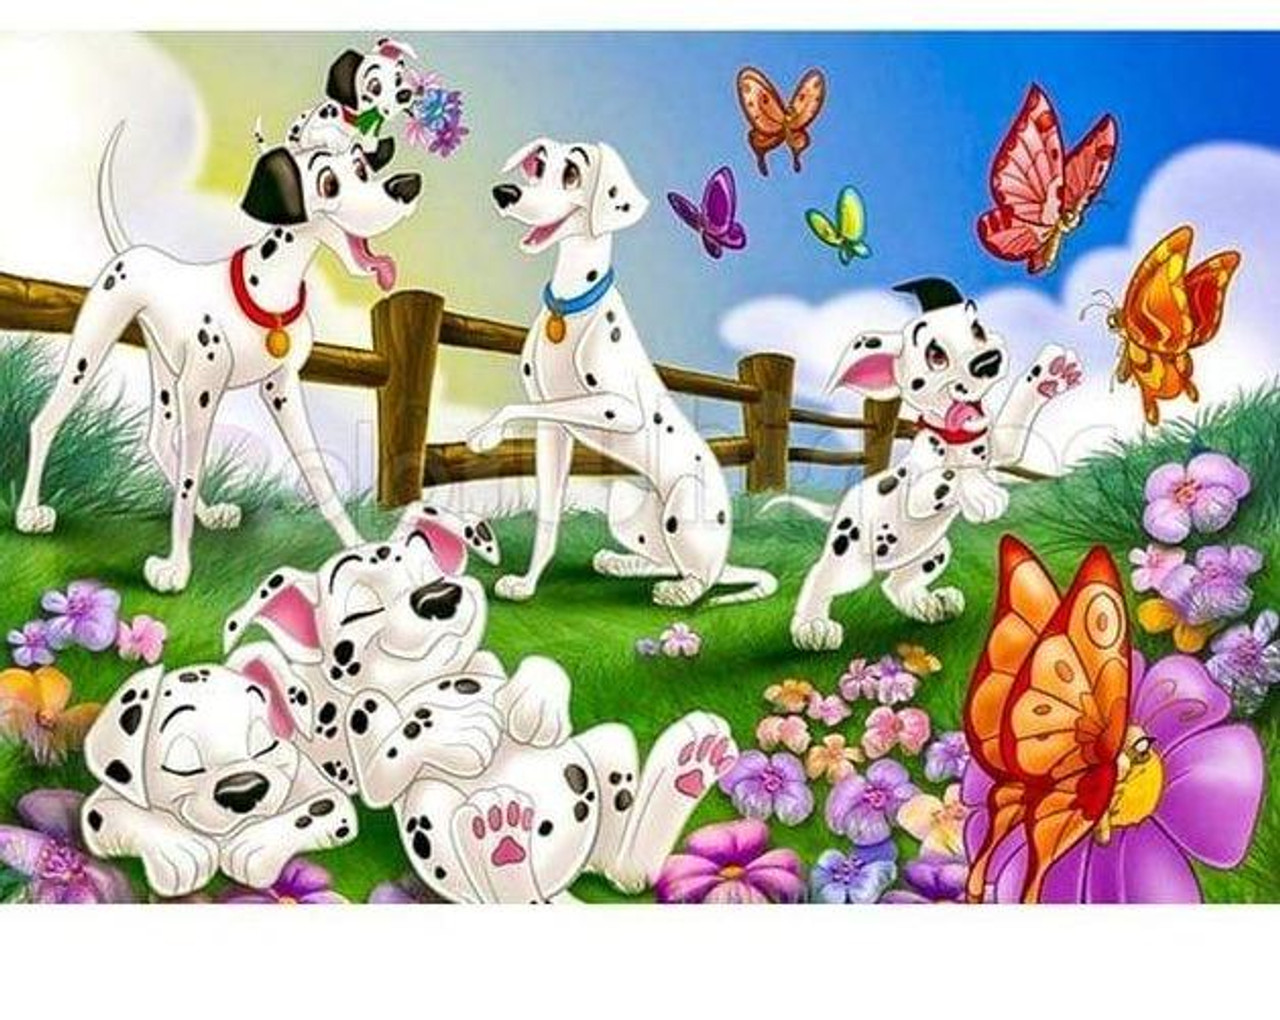 Noche Animal Dog Diamond Painting Kits,Poodles and Butterflies 5D Round  Diamond Digital Painting Beginners Crystal Paste Process,Suitable for Room